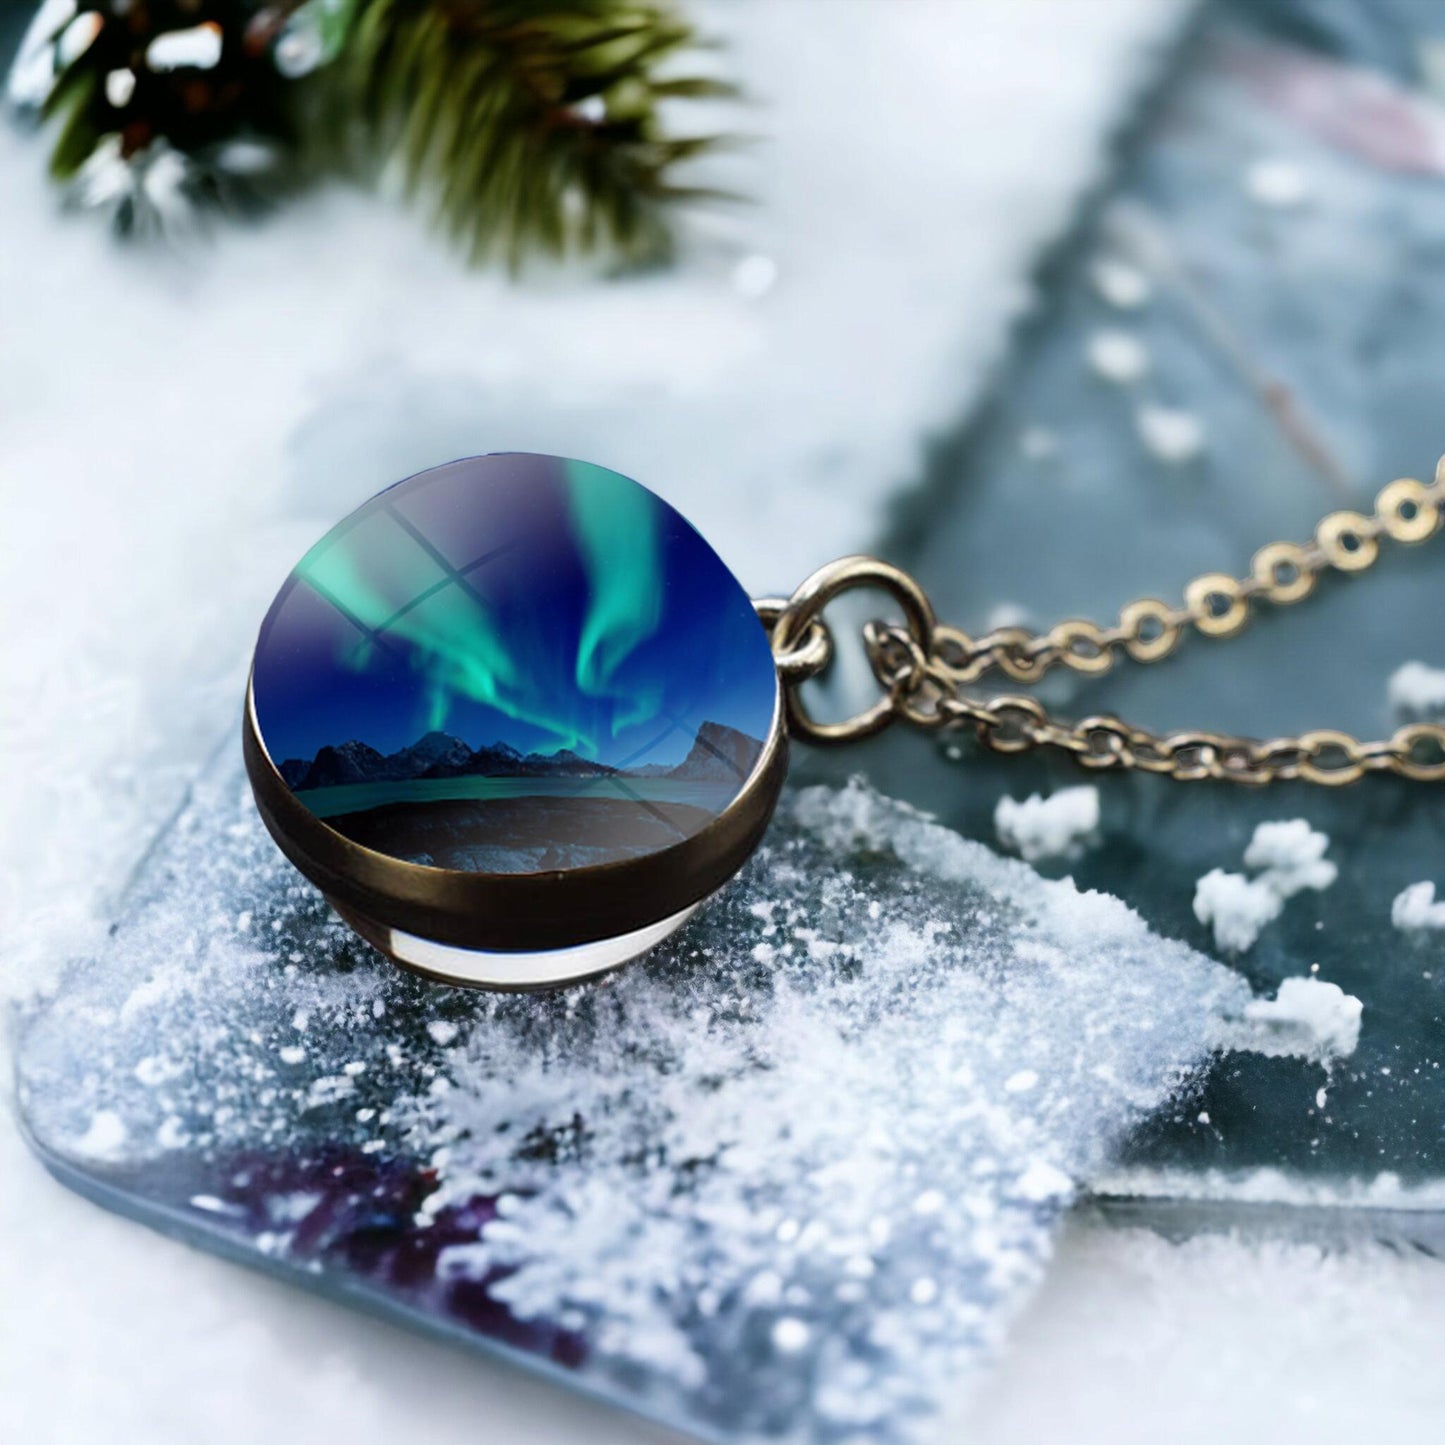 Unique Aurora Borealis Silver Necklace - Northern Light Jewelry - Double Side Glass Ball Pendent Necklace - Perfect Aurora Lovers Gift 8